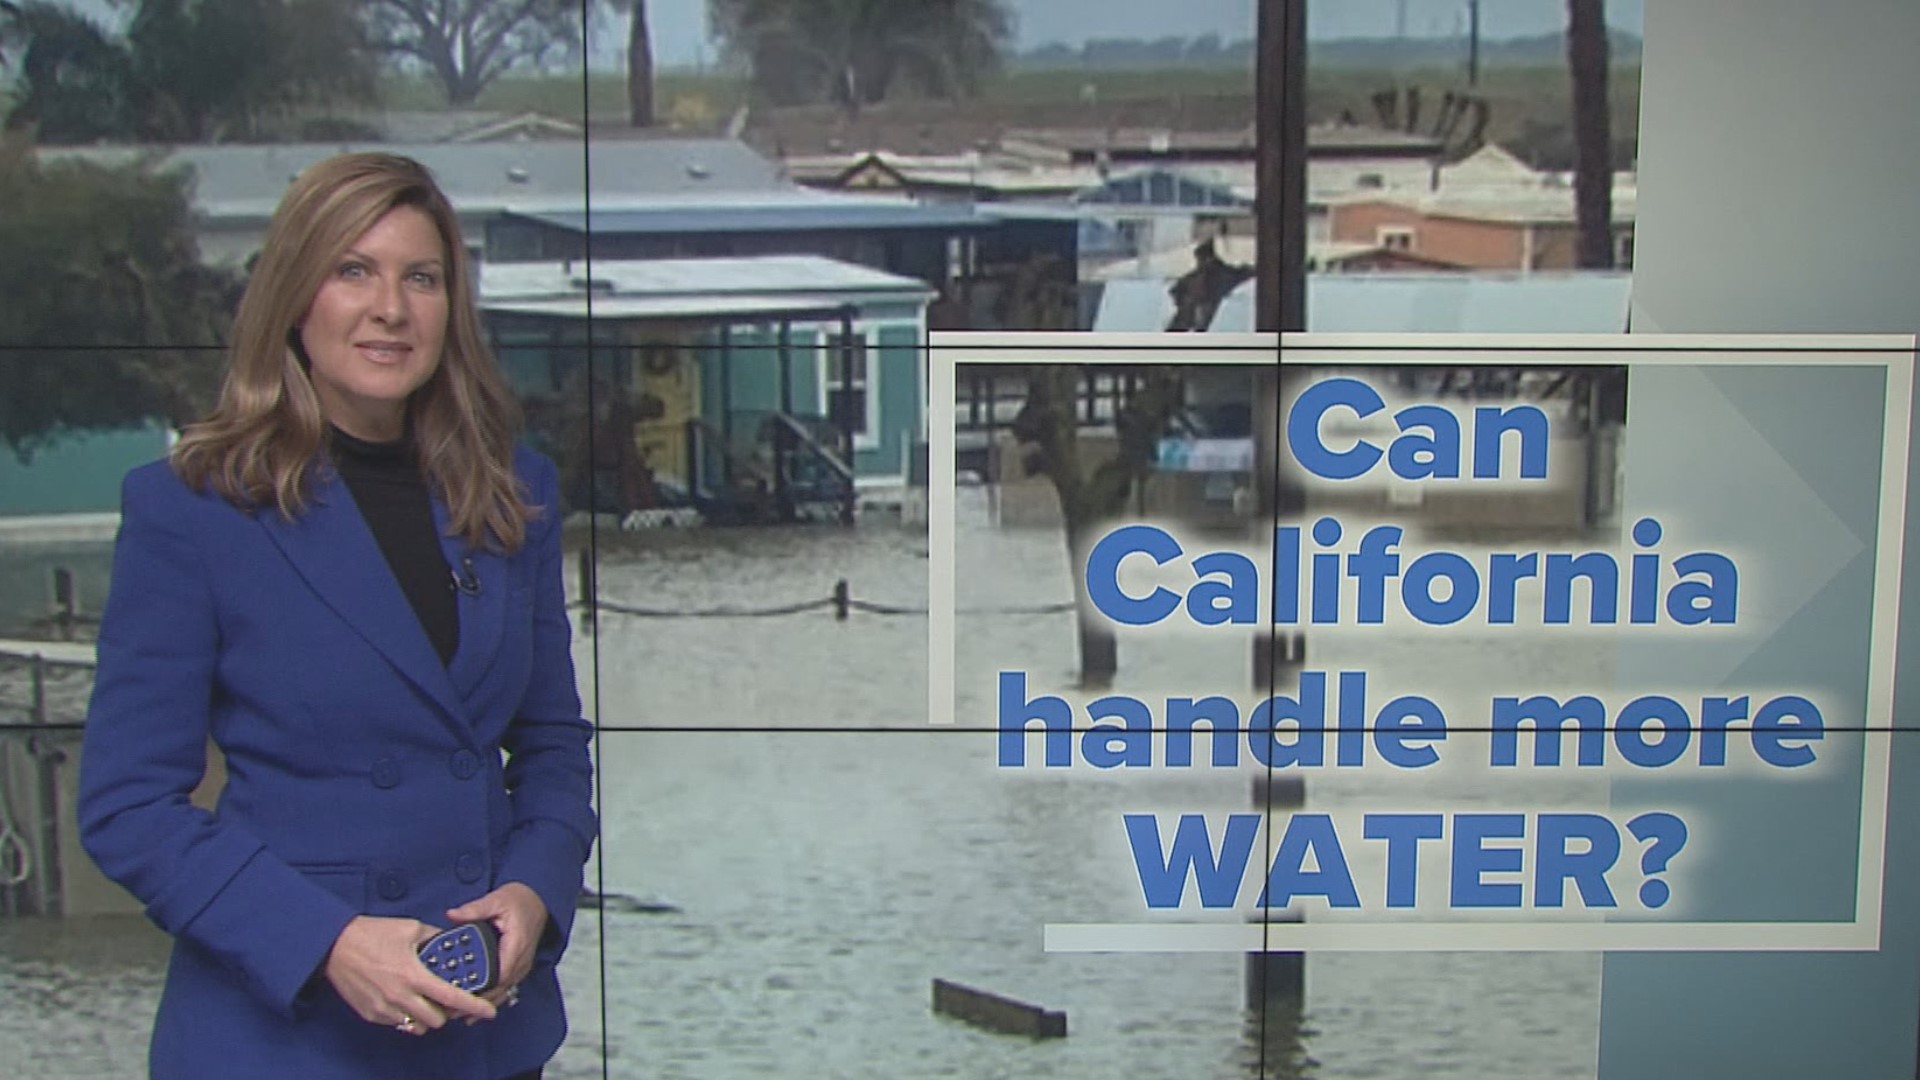 California has seen 12 Atmospheric Rivers since late December, delivering beneficial rain and damaging floods. Tracking how much more water the state can handle.